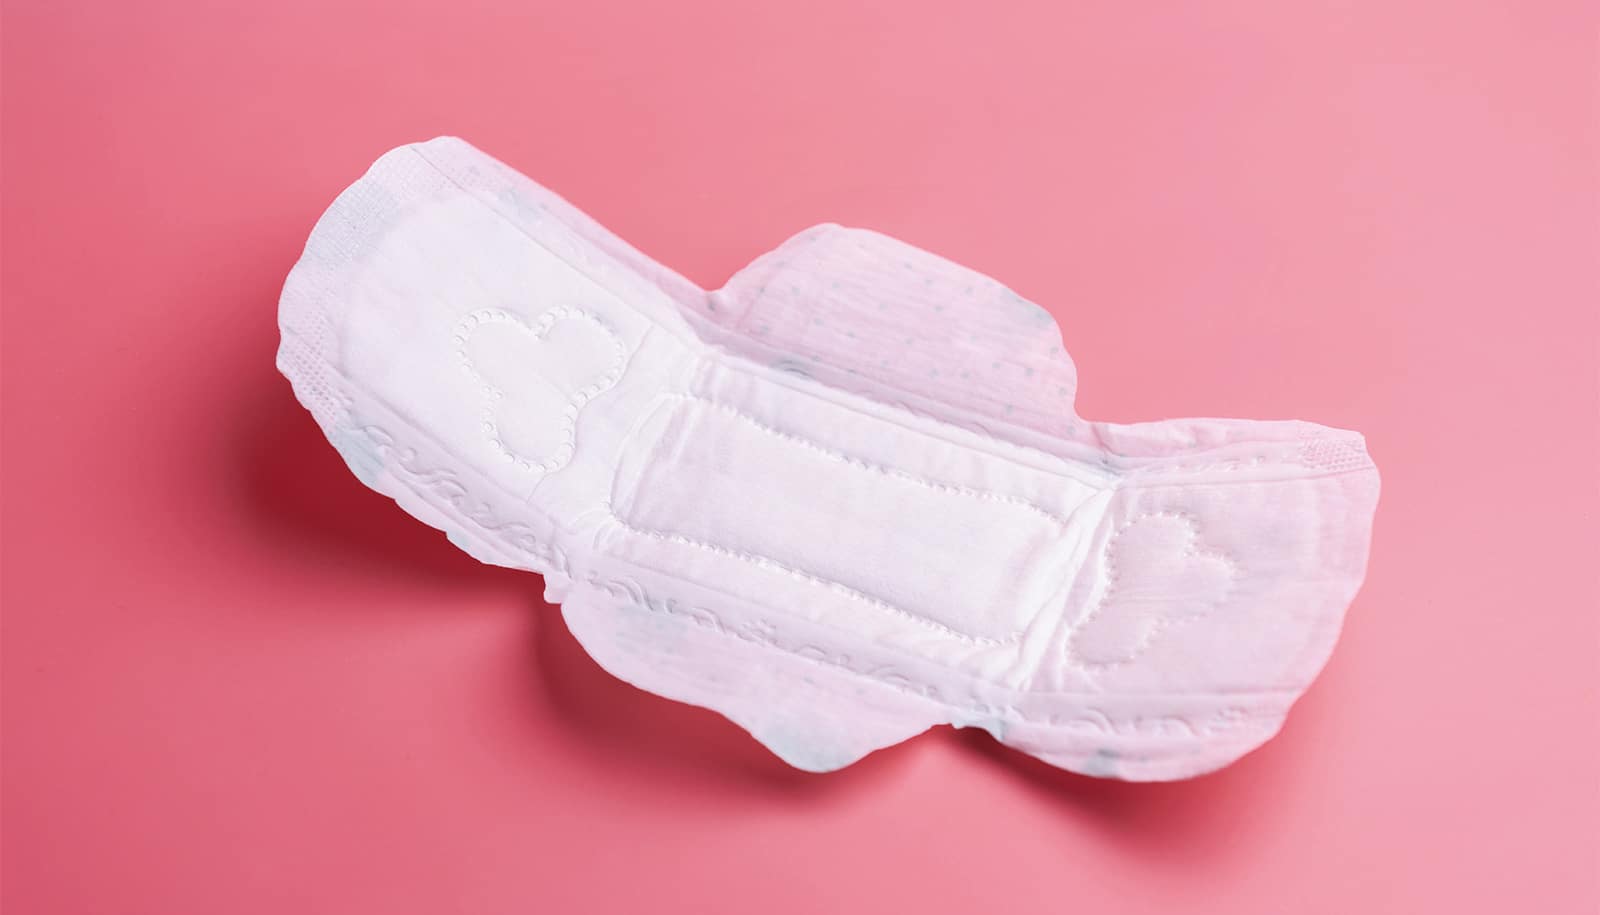 Forever chemicals' found in tampons, period underwear, and more